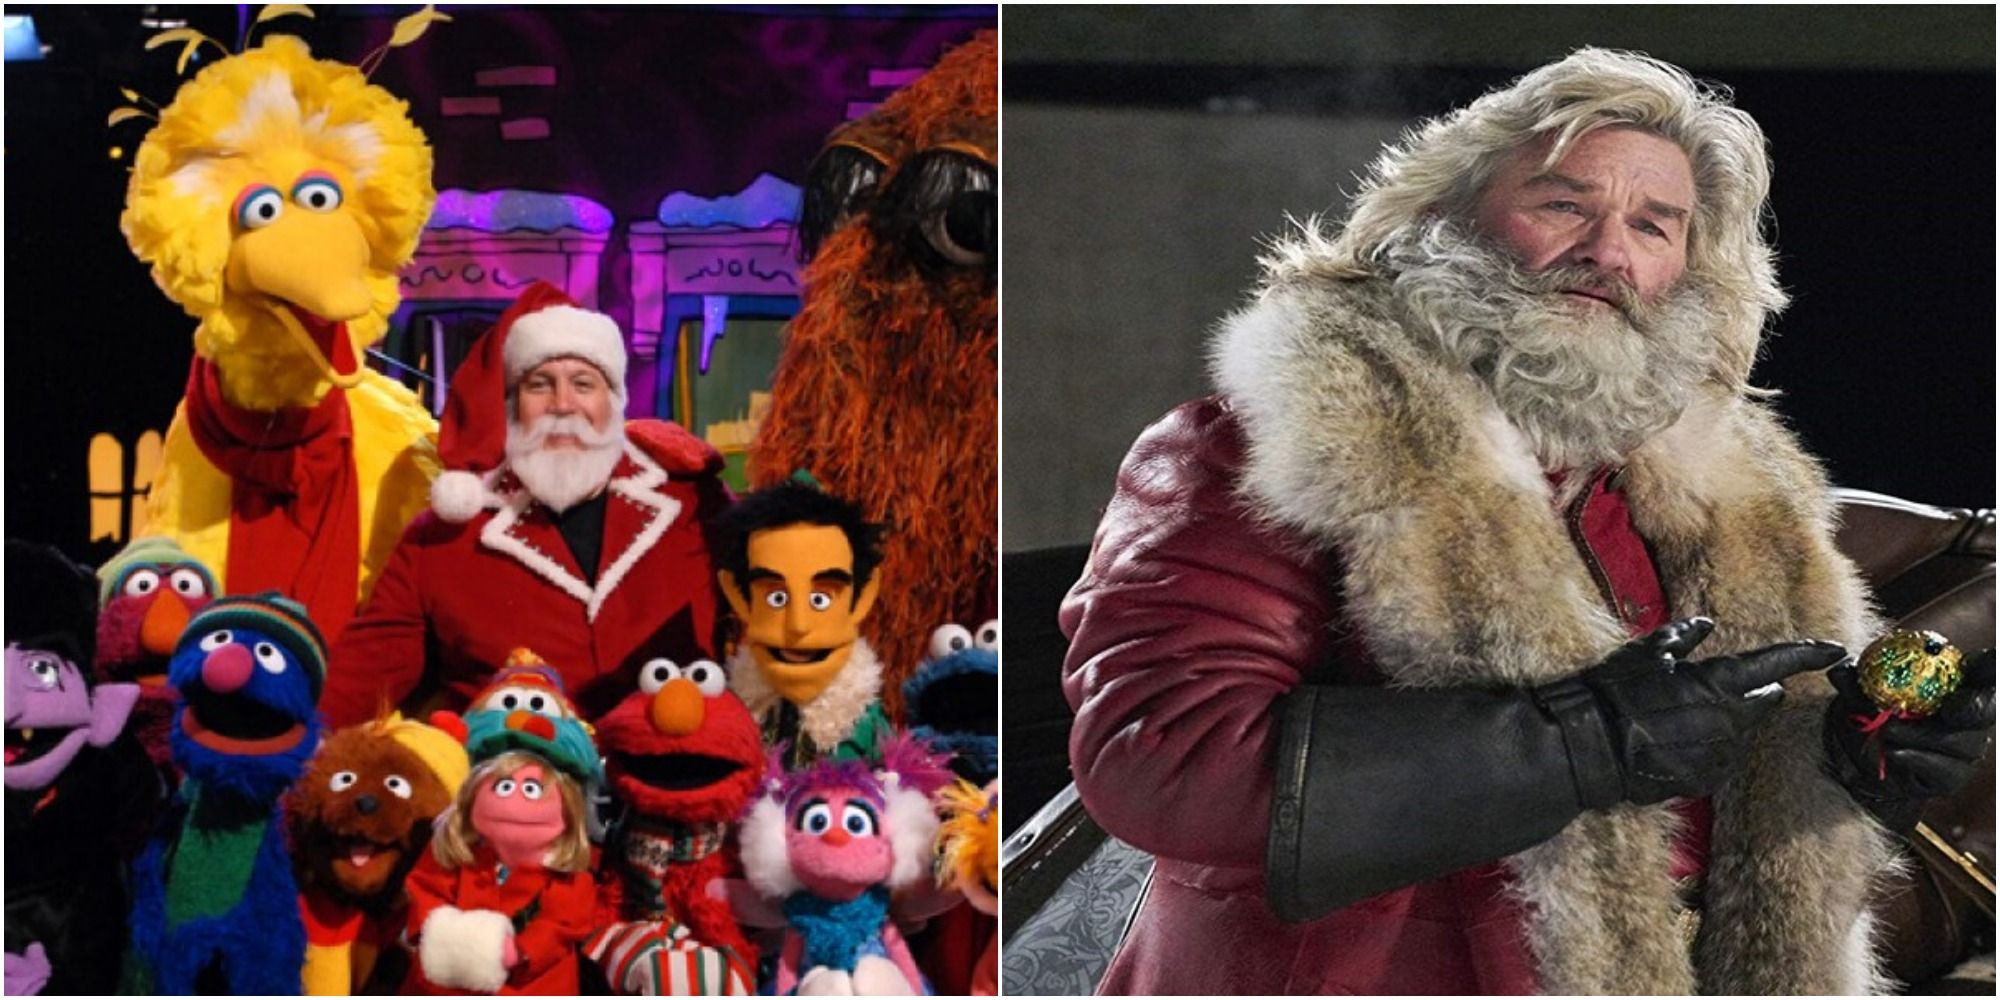 Kevin James and Kurt Russell, two actors who portray Santa Claus